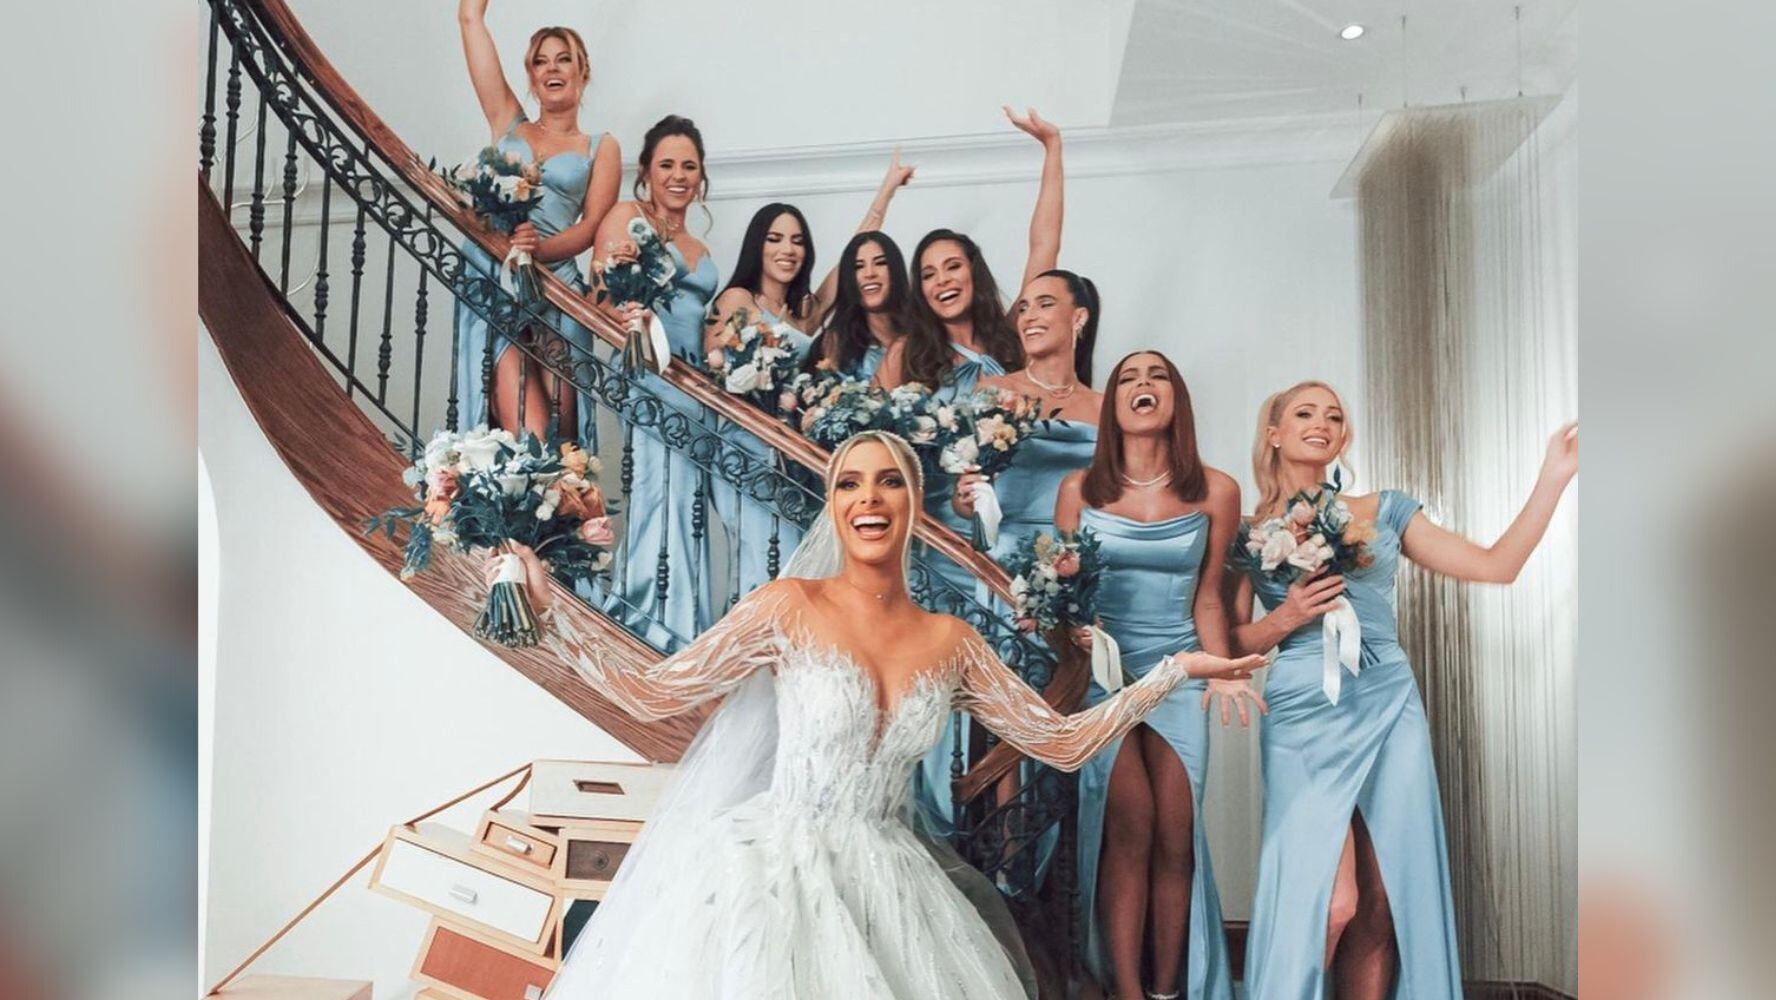 Wedding of Lele Pons and Guaynaa: These are the three dresses that the influencer used